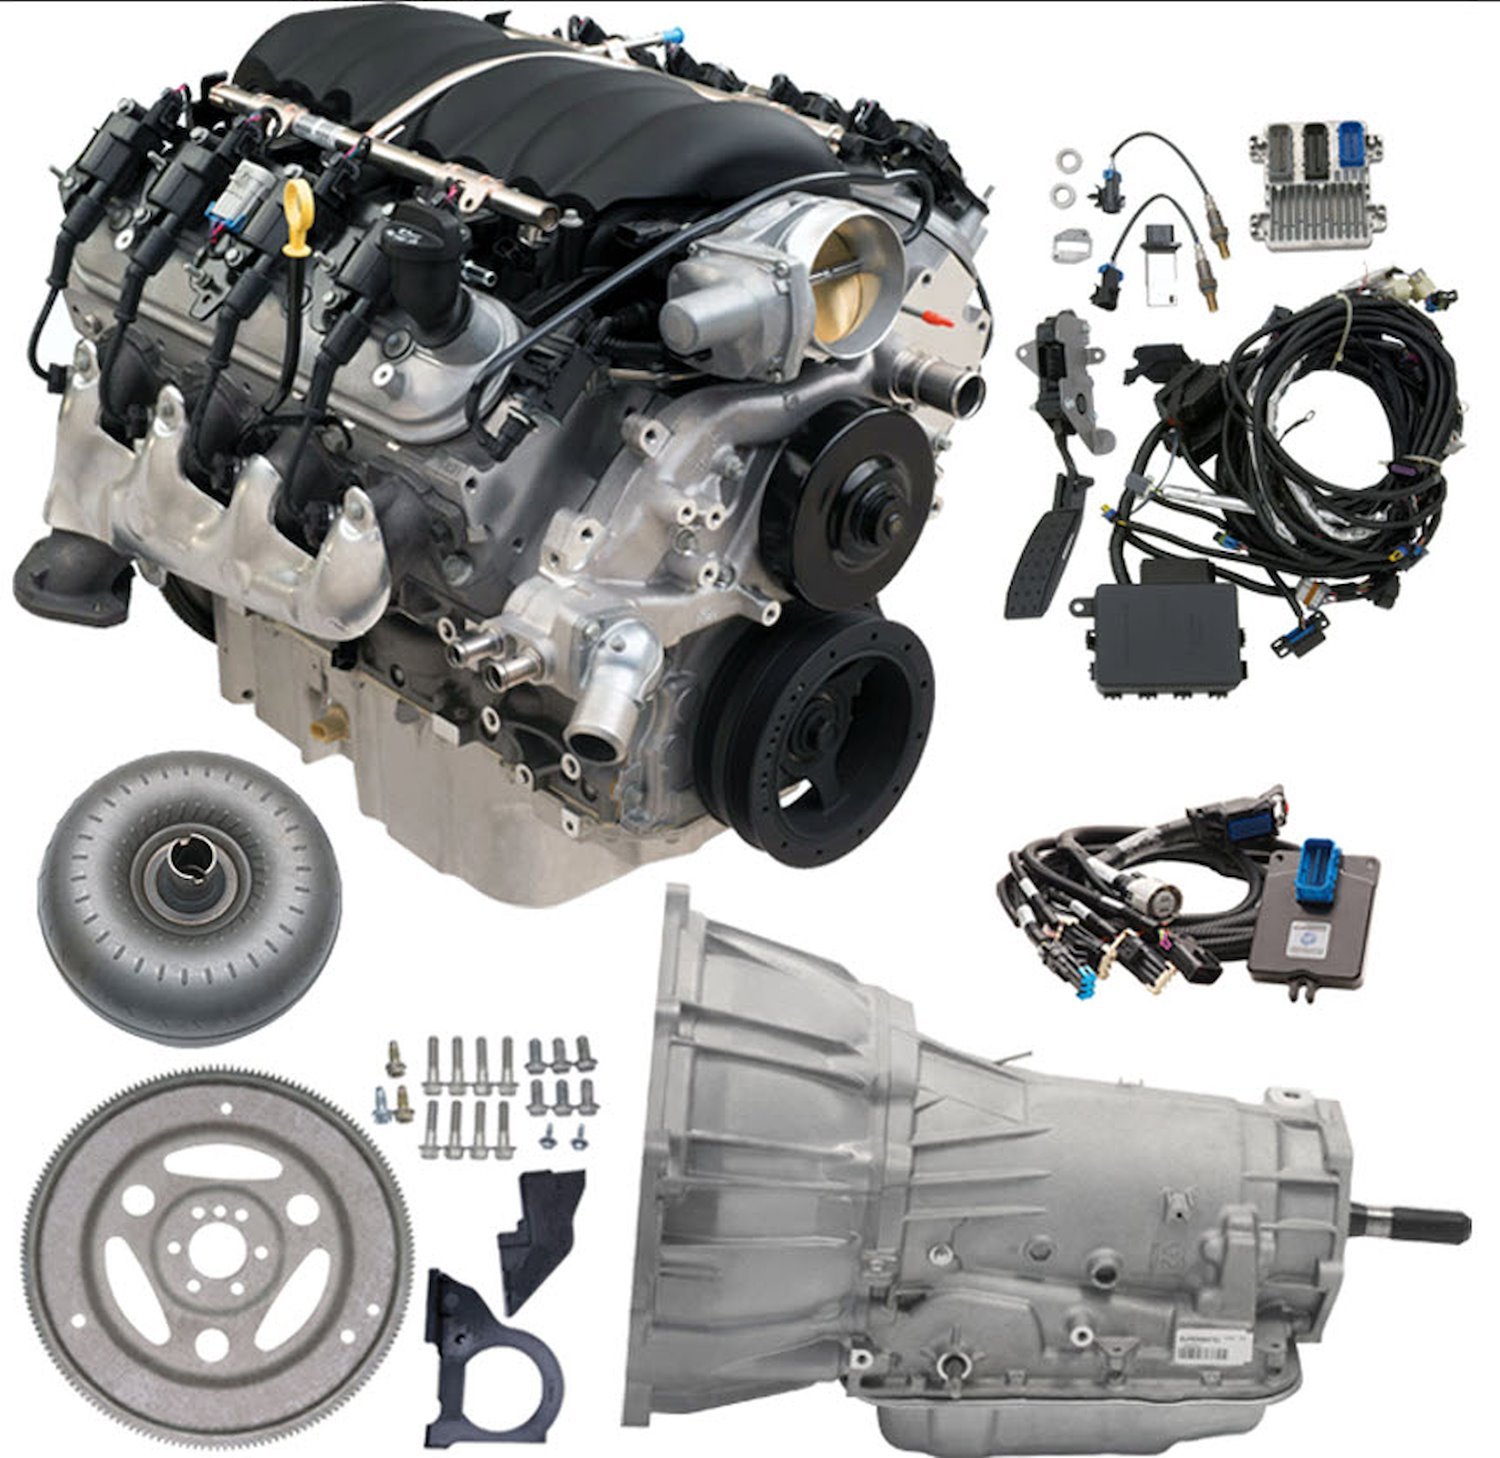 19435098 GM LS3 6.2L Crate Engine Connect & Cruise Powertrain System w/4L70-E 4WD Transmission